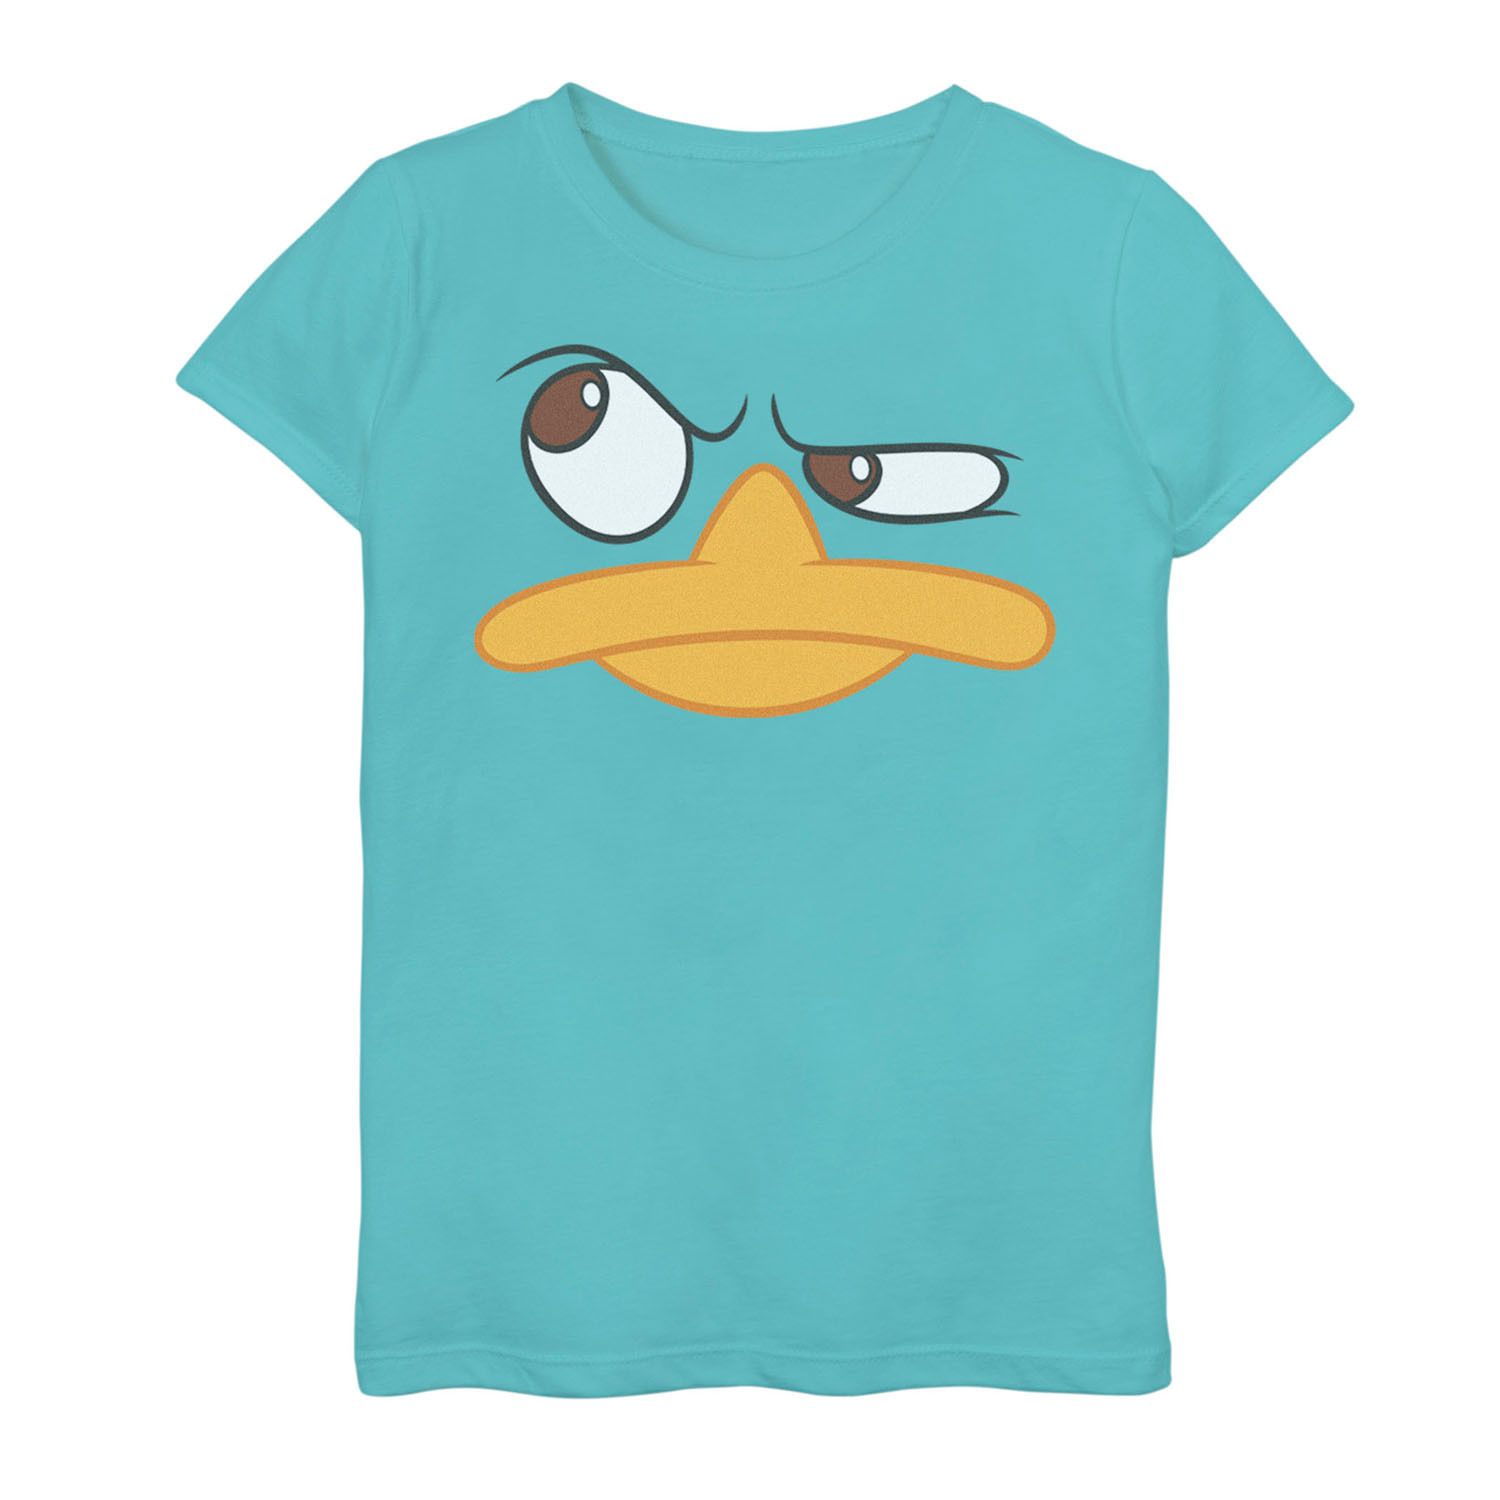 Image for Disney Girls 7-16 Phineas And Ferb Perry The Platypus Big Face Portrait Graphic Tee at Kohl's.